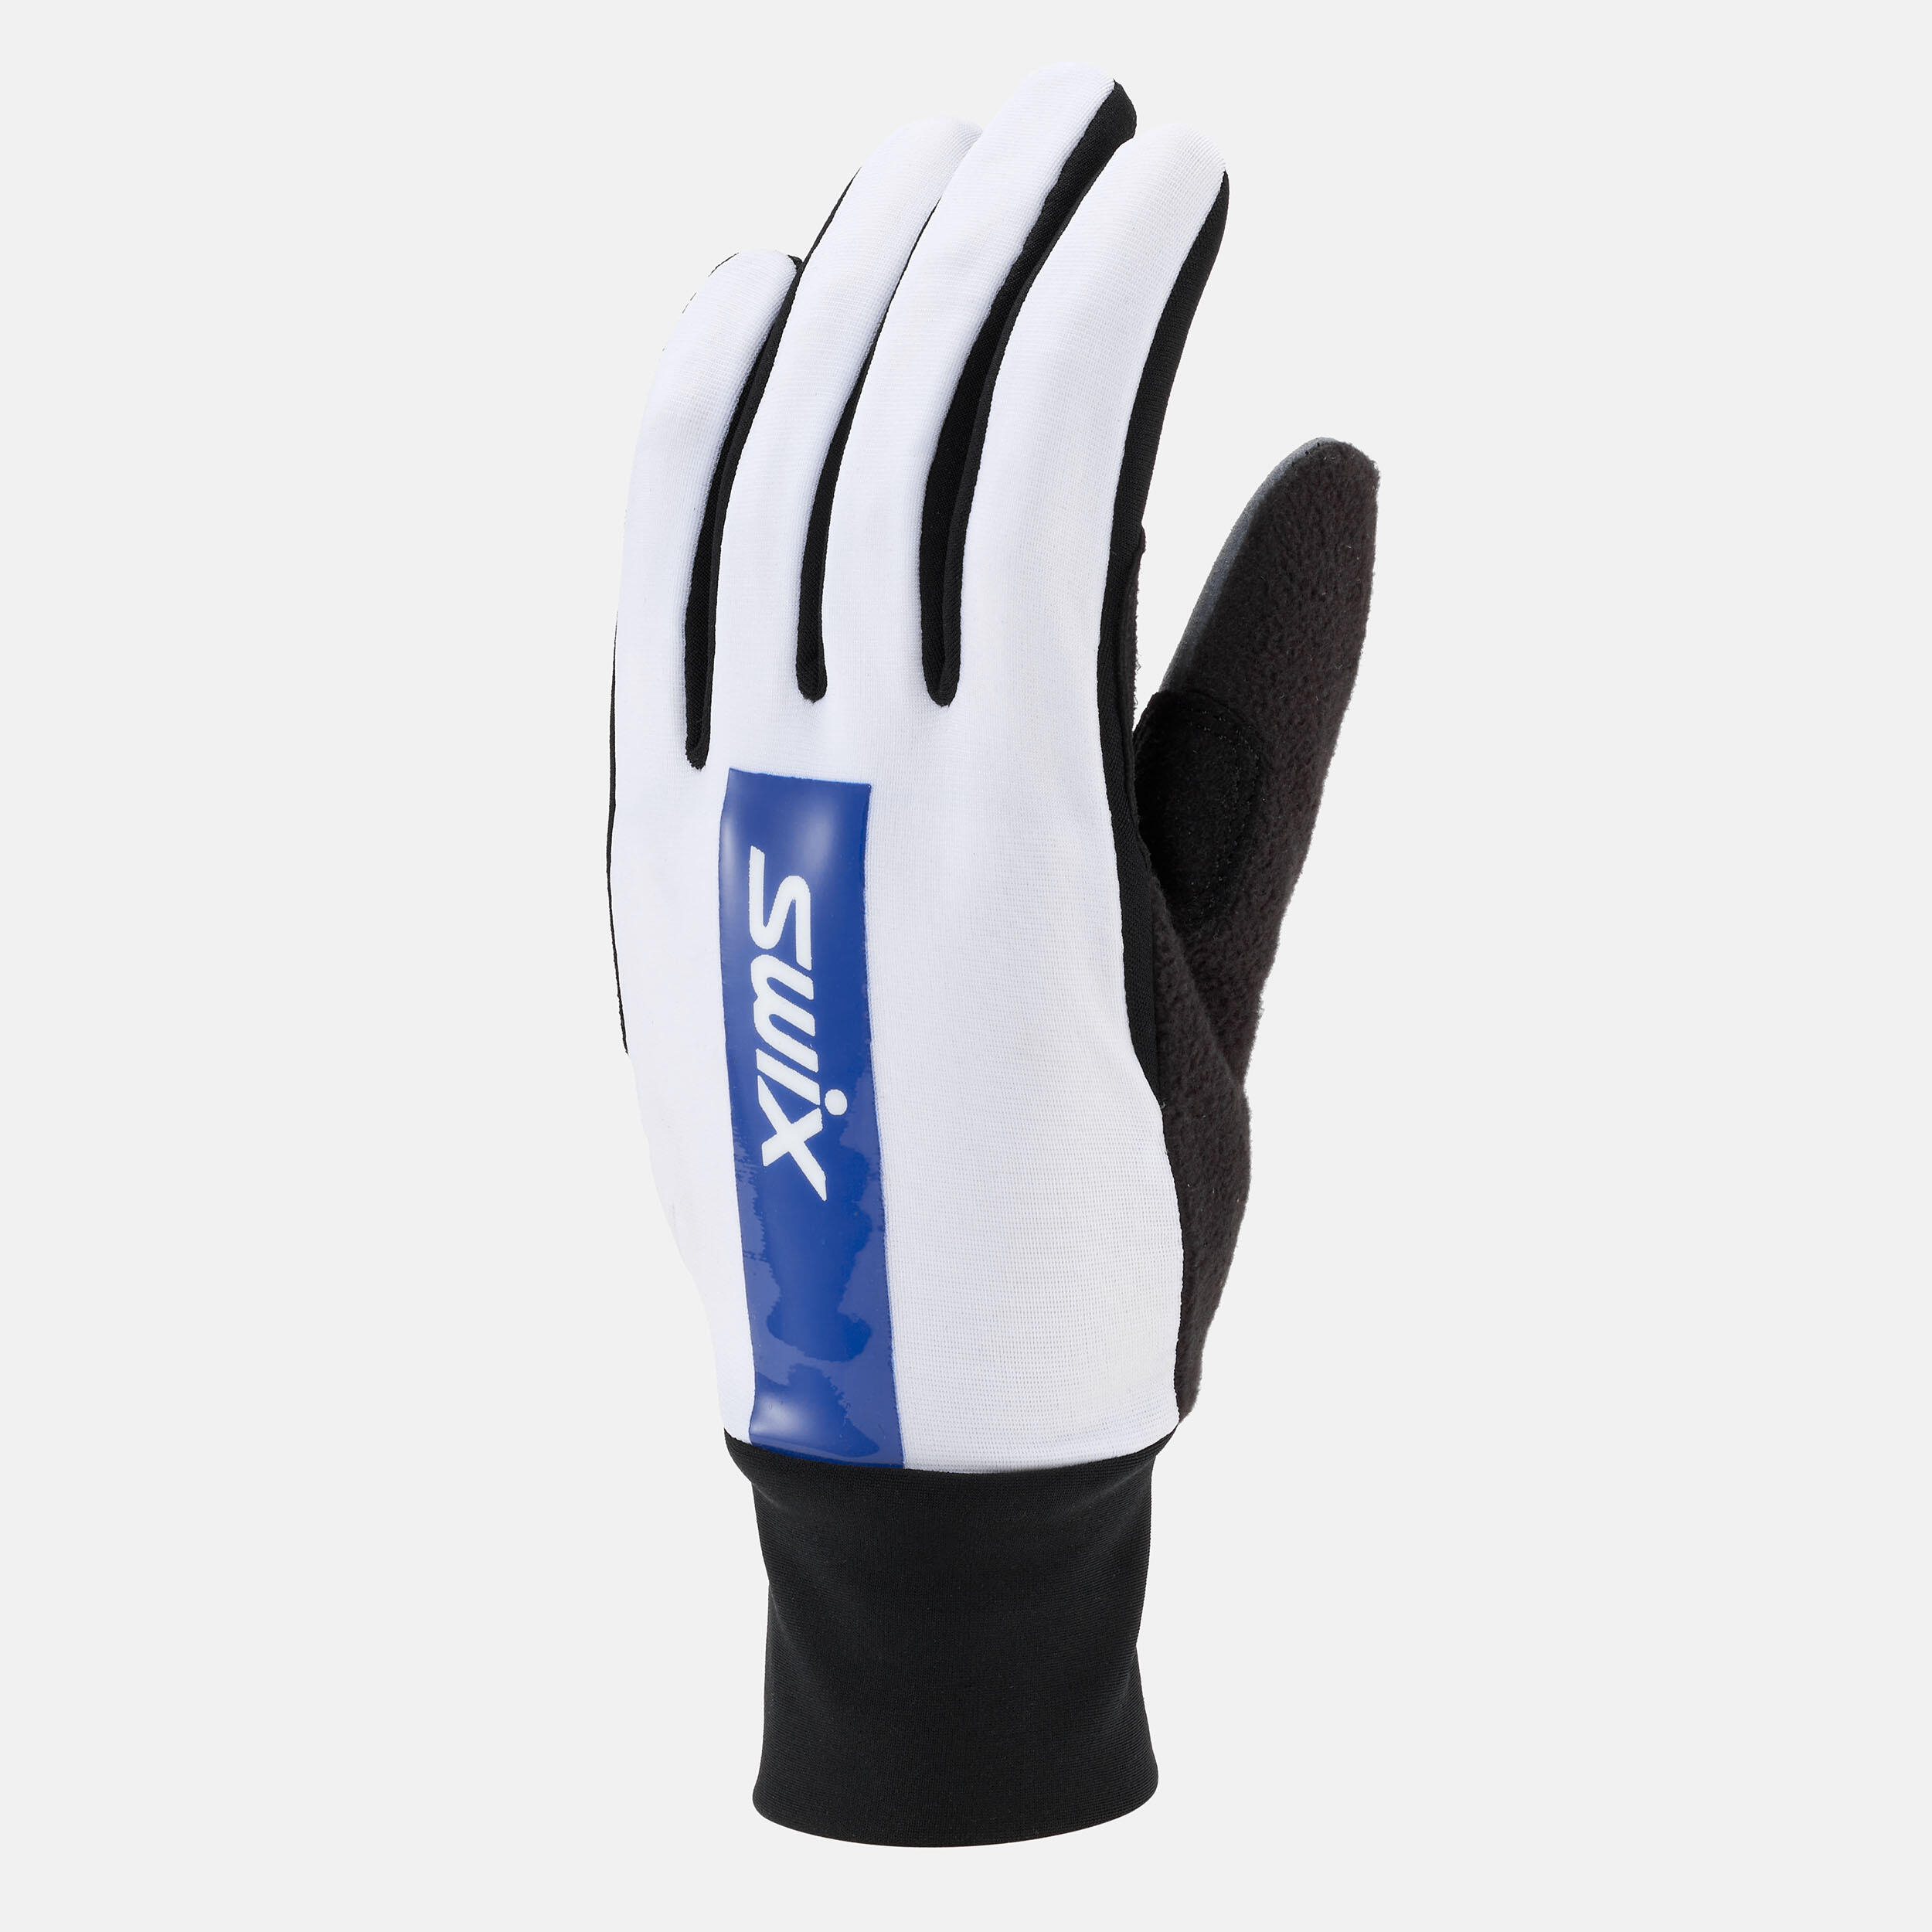 Focus SWIX technical cross-country skiing gloves 5/6